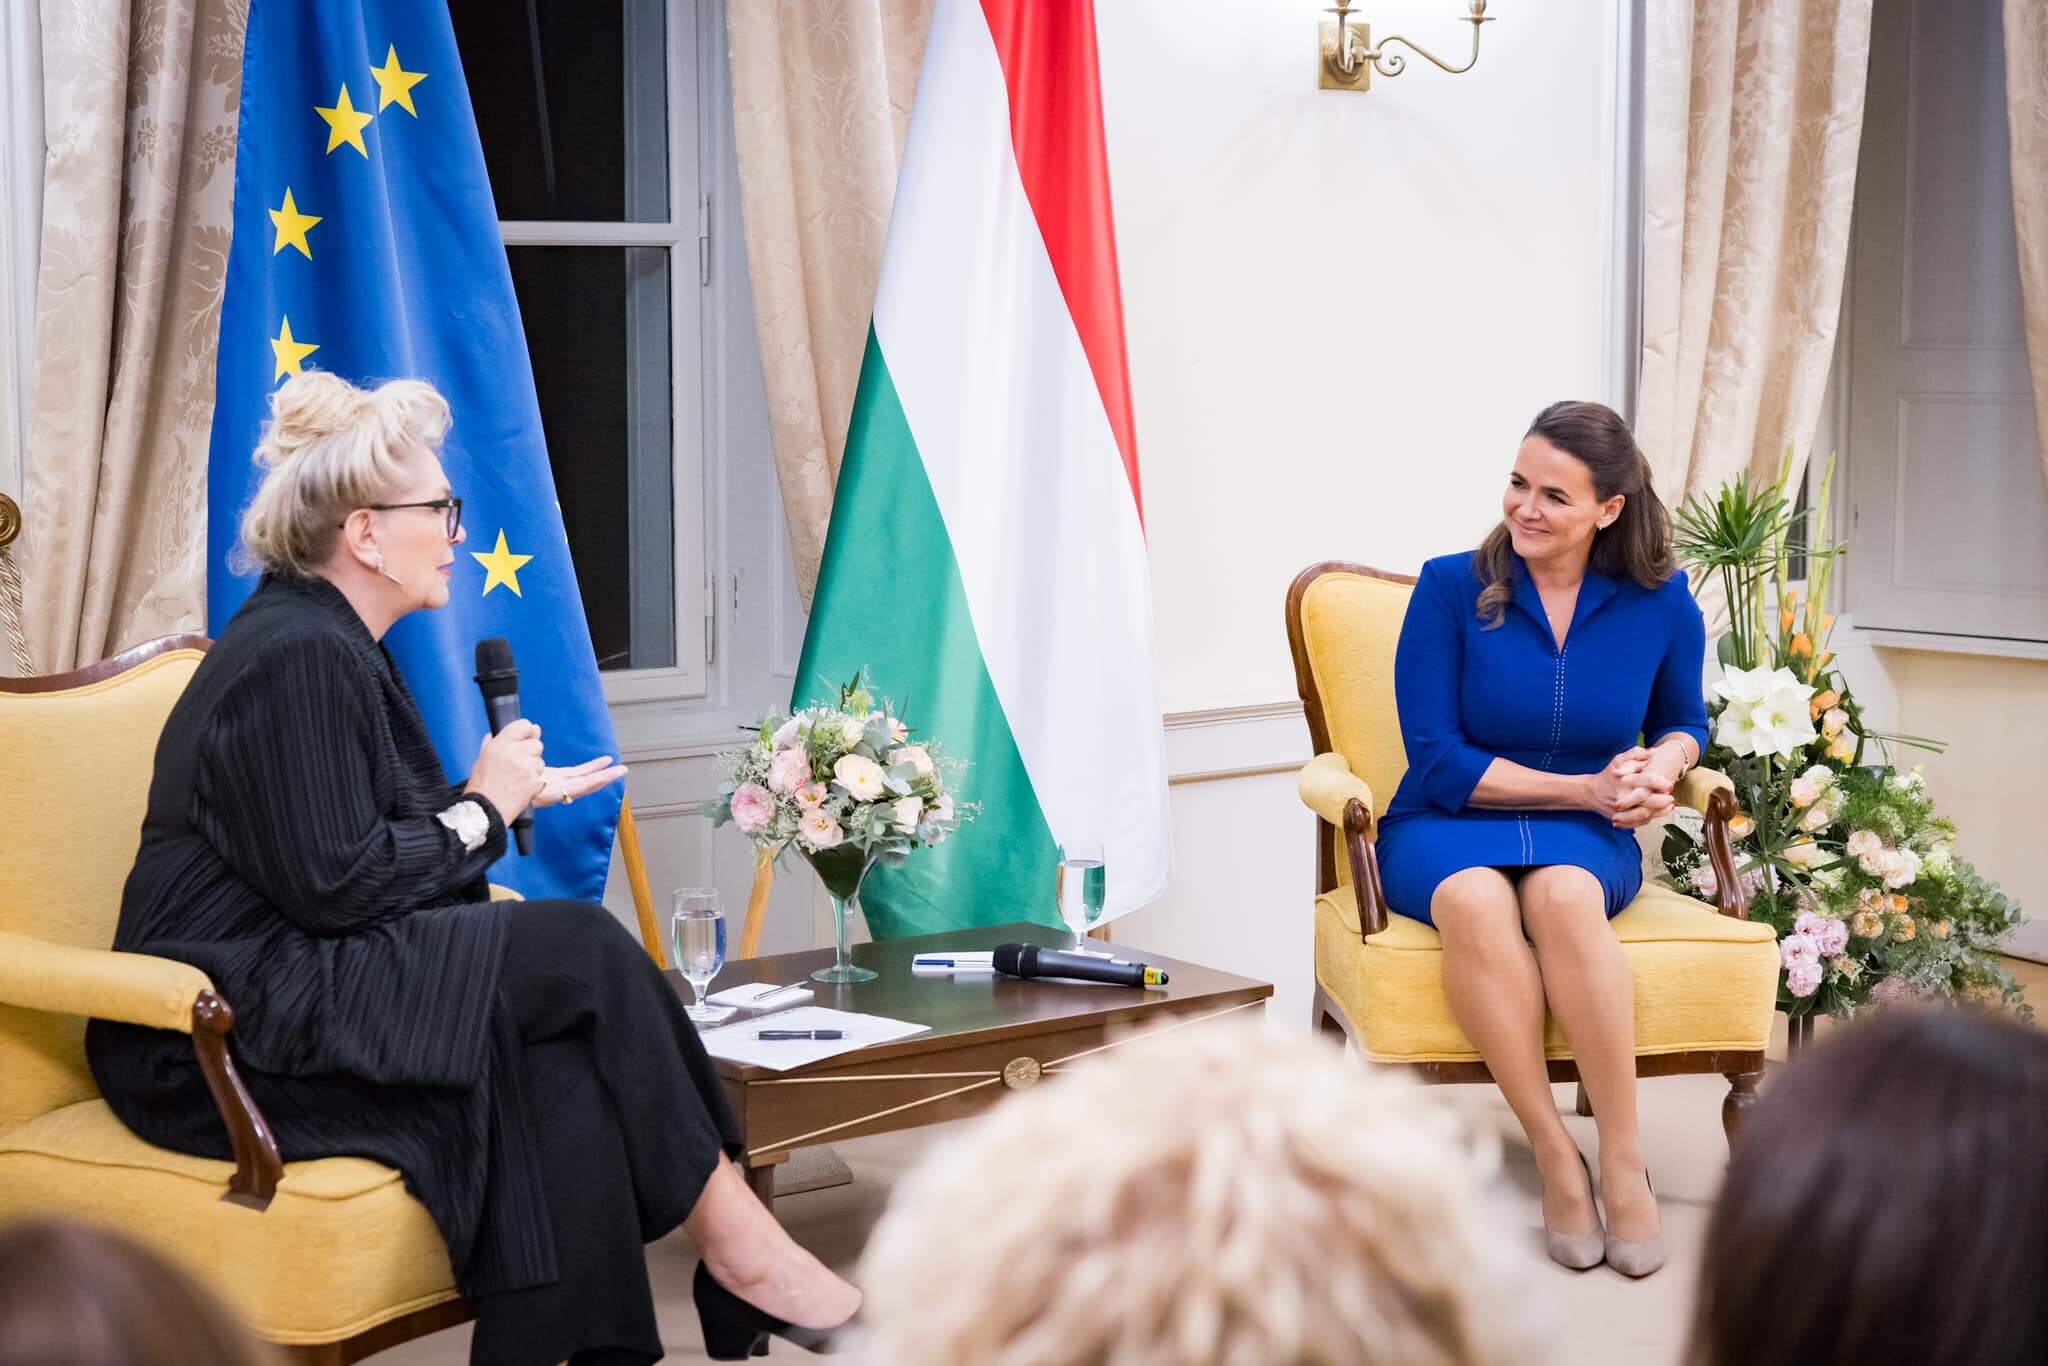 'Women's Peace-Making Skills' Highlighted by Hungarian President